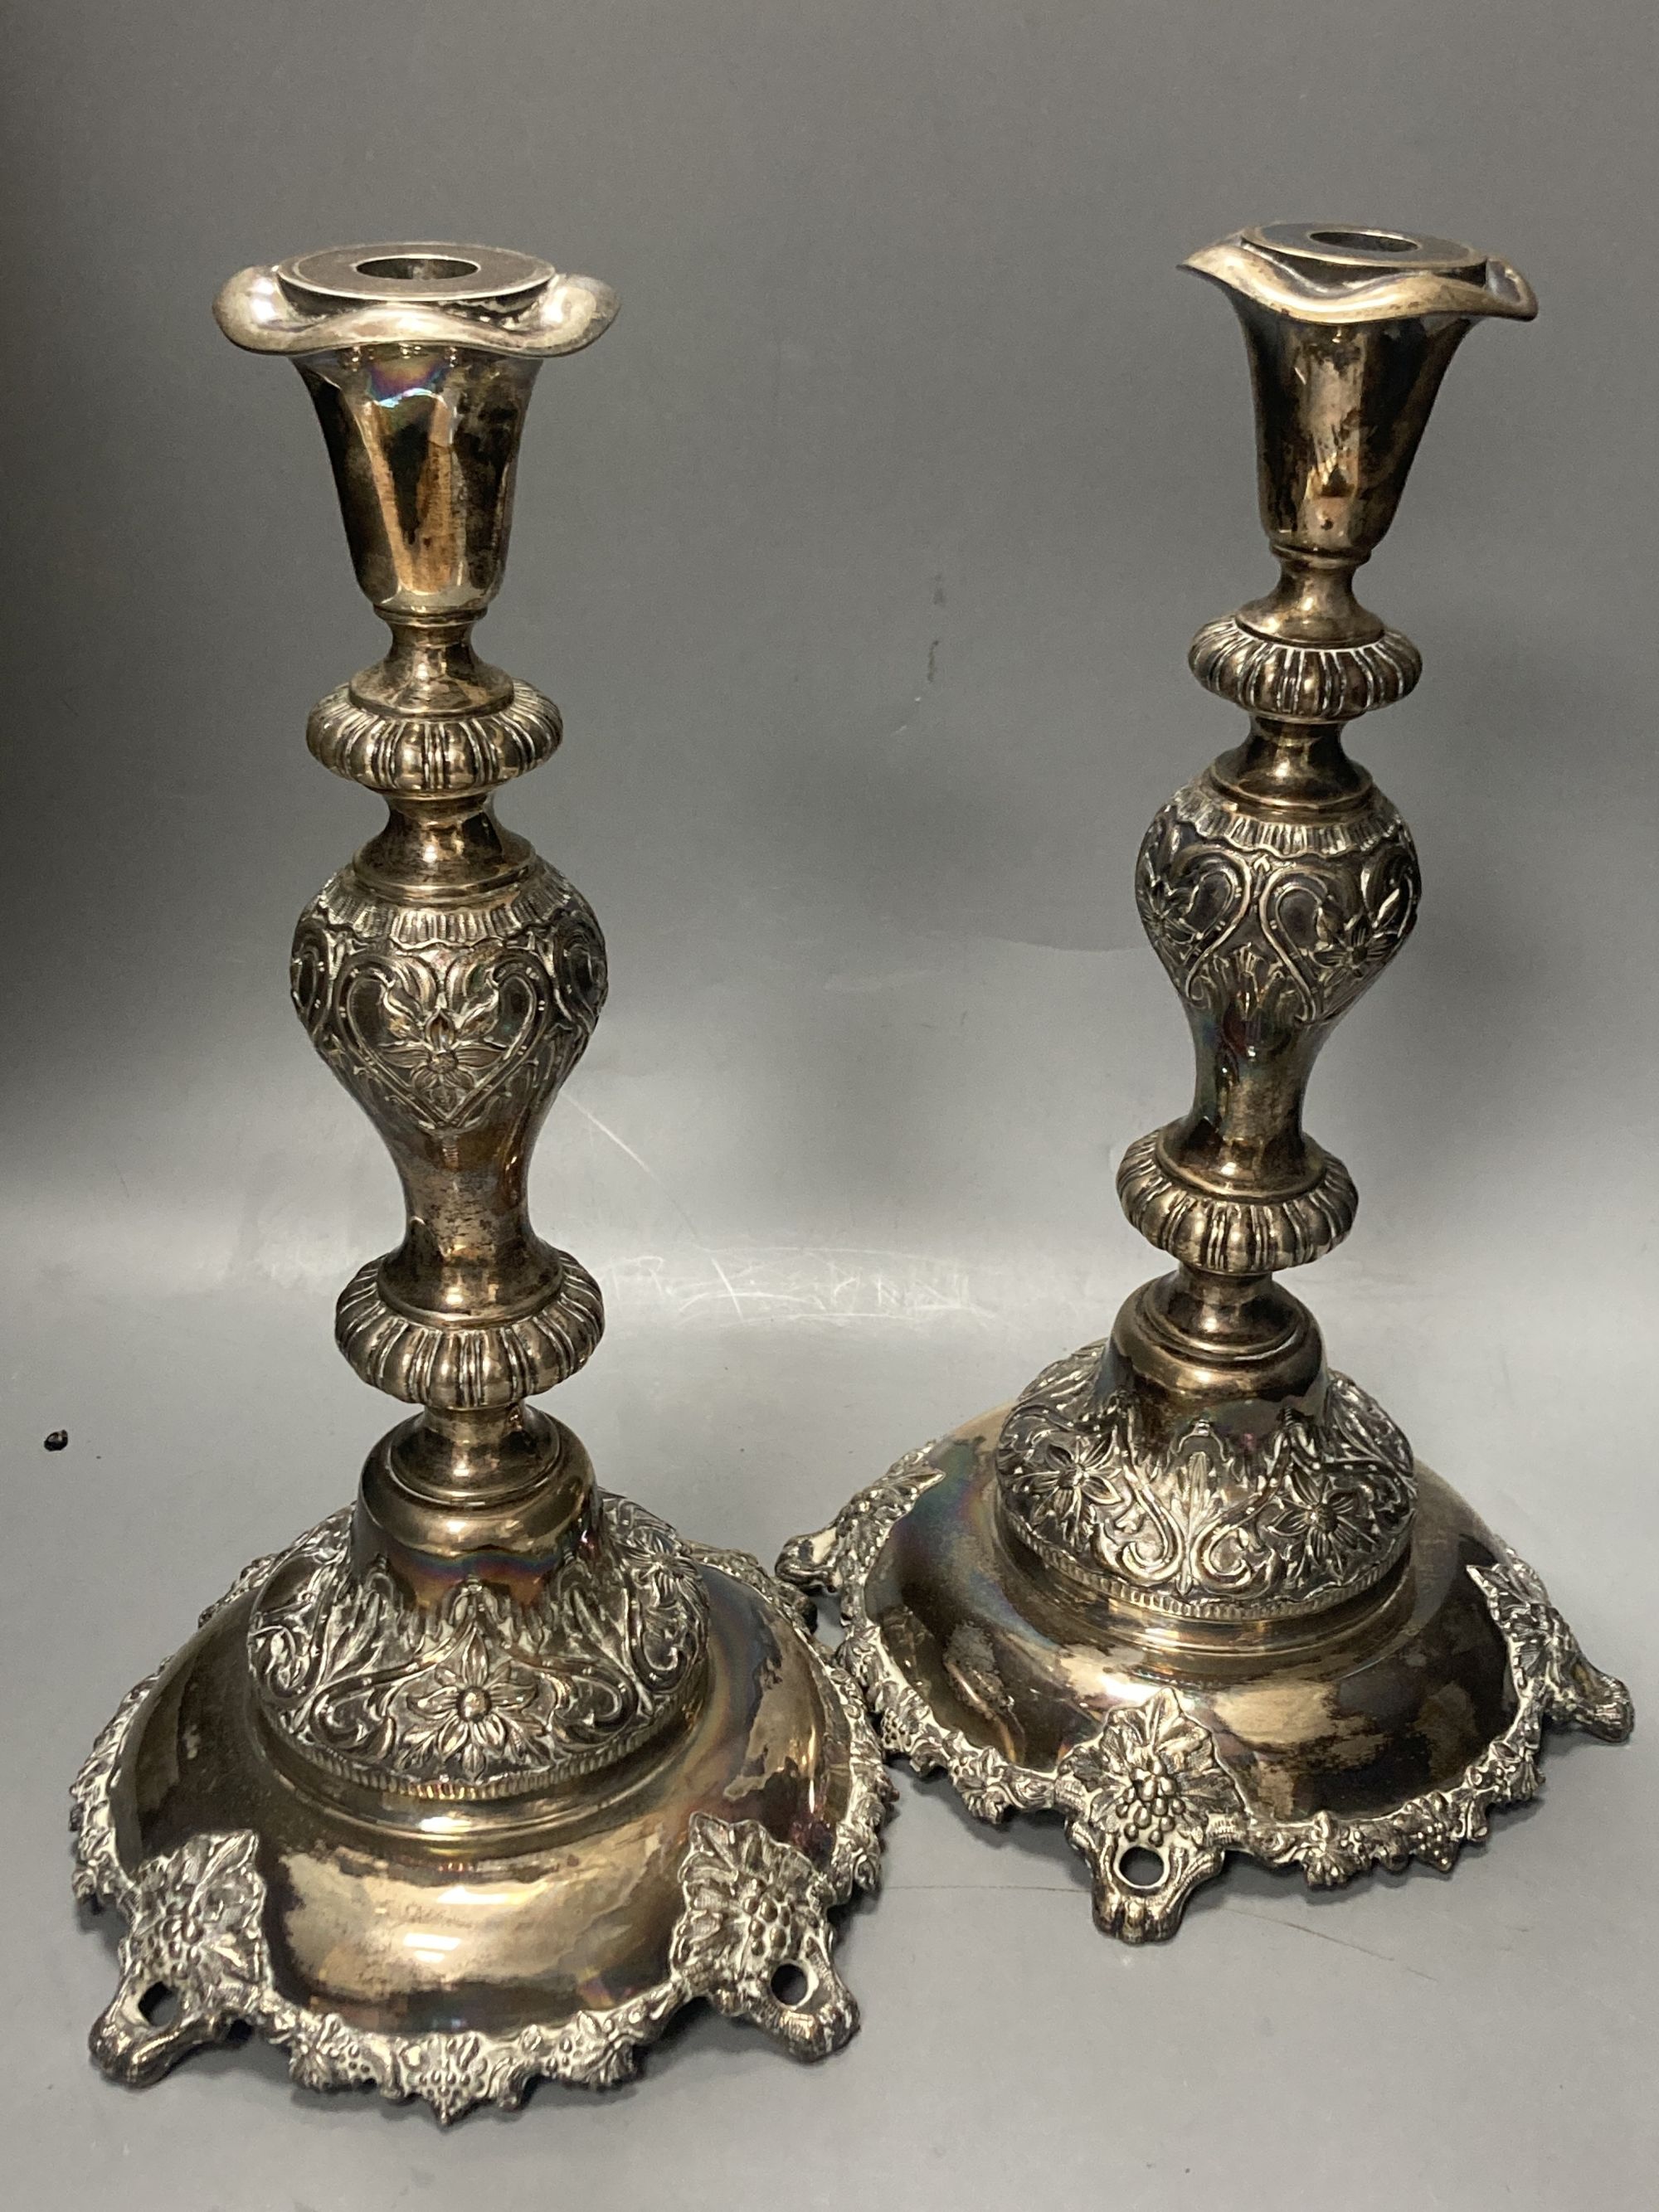 A pair of large Russian late 19th century 84 zolotnik Sabbath Day candlesticks, stamped Pogorzelski, dated 1892,